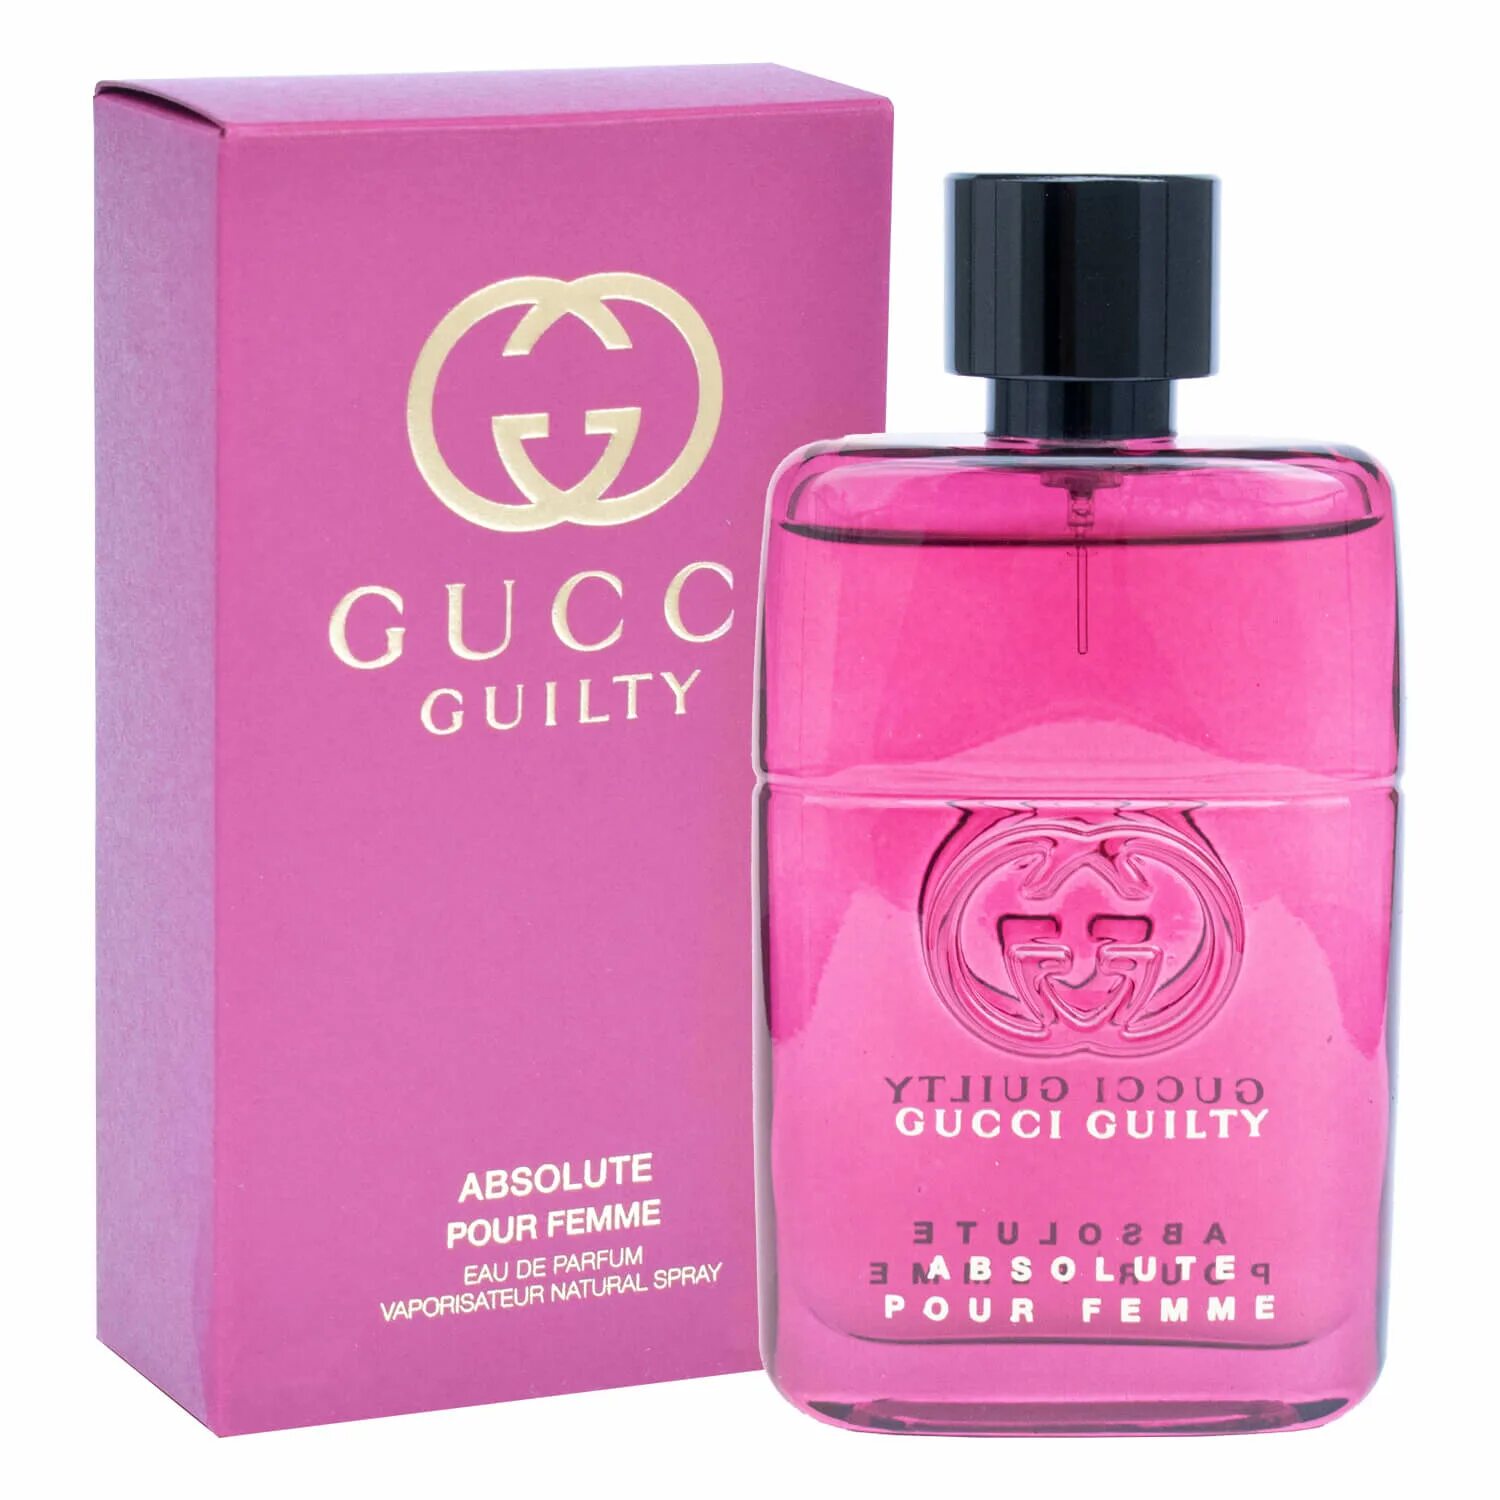 Gucci guilty absolute pour. Gucci guilty absolute pour femme EDP 50ml. Gucci guilty absolute pour femme. Gucci guilty pour femme EDP 50ml. Gucci guilty absolute pour femme,90 мл.